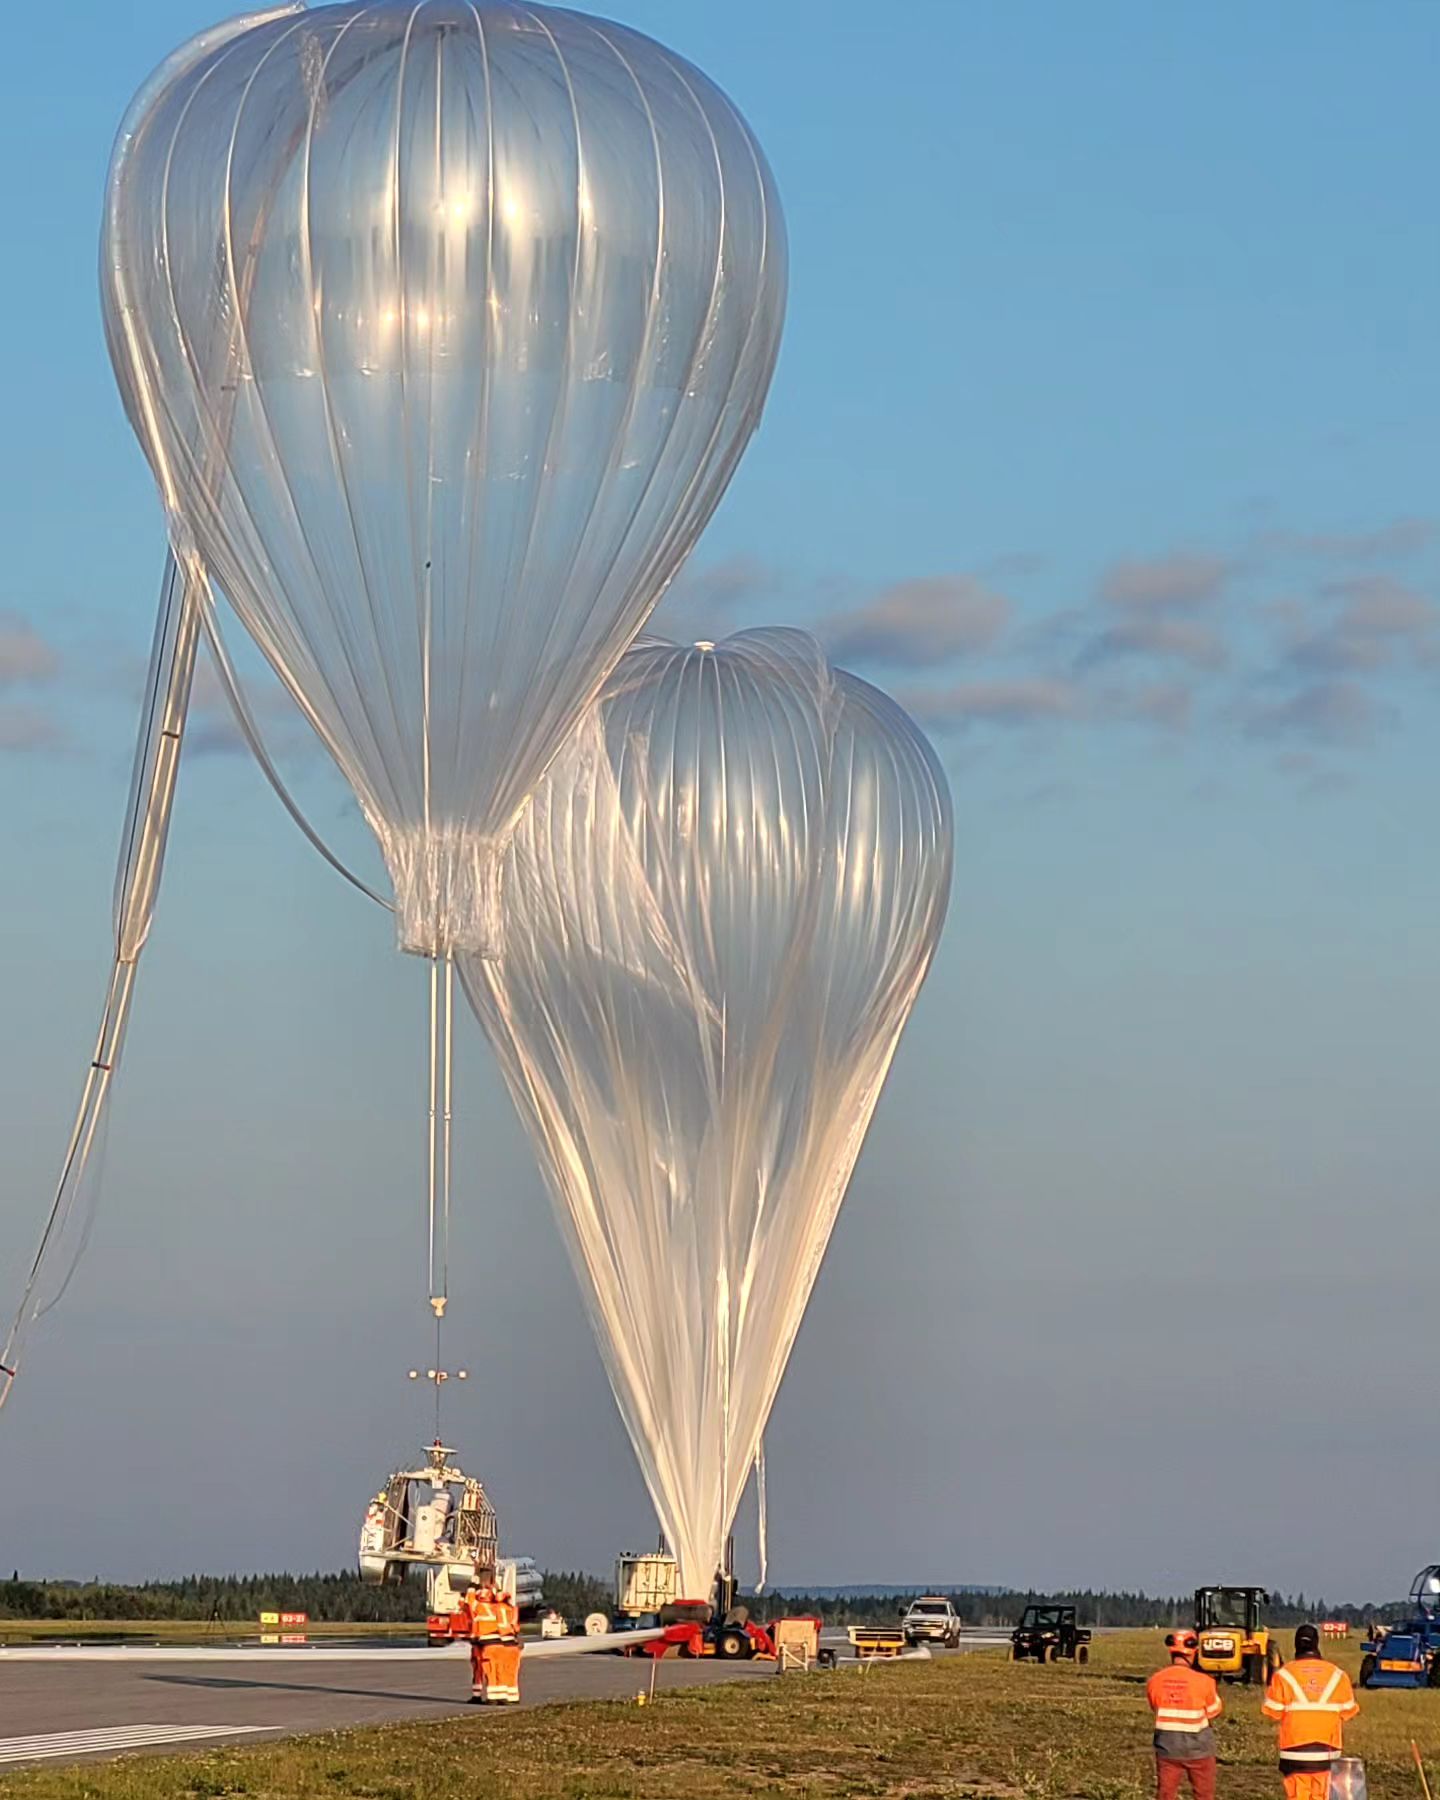 Main balloon inflation (Image: Remy Grenier)